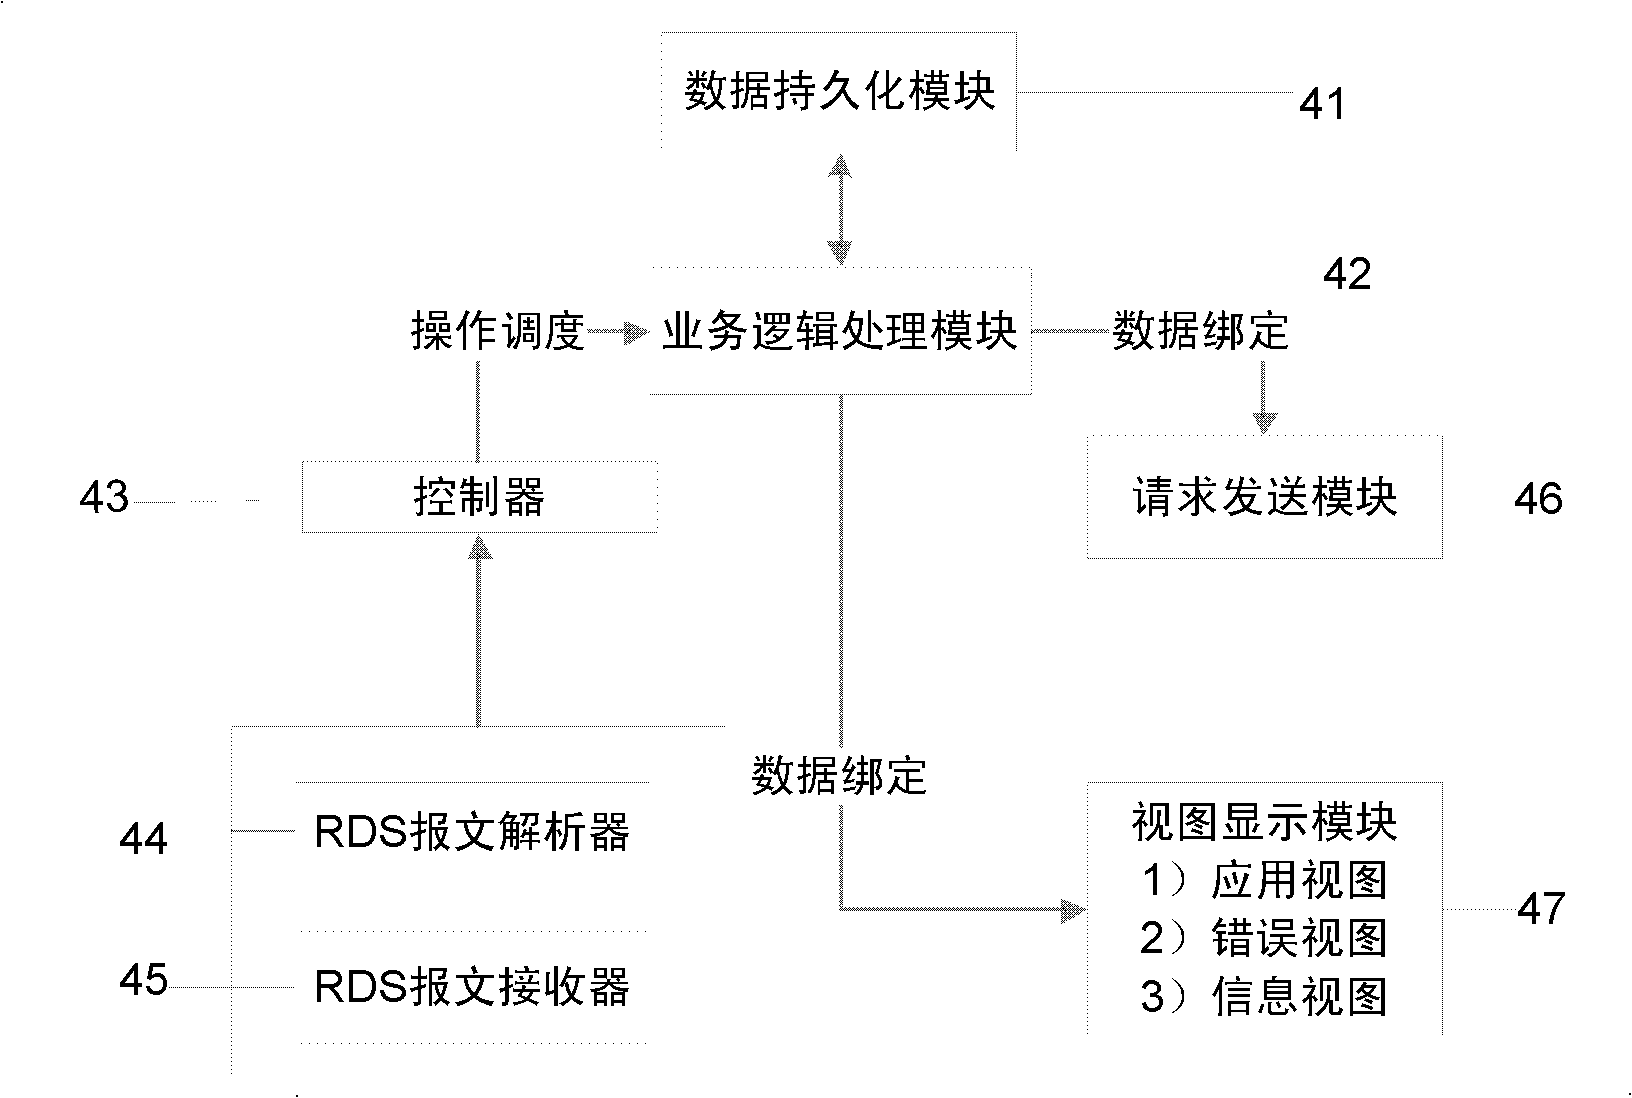 Online group interaction system and method based on RDS (Remote Data Services)